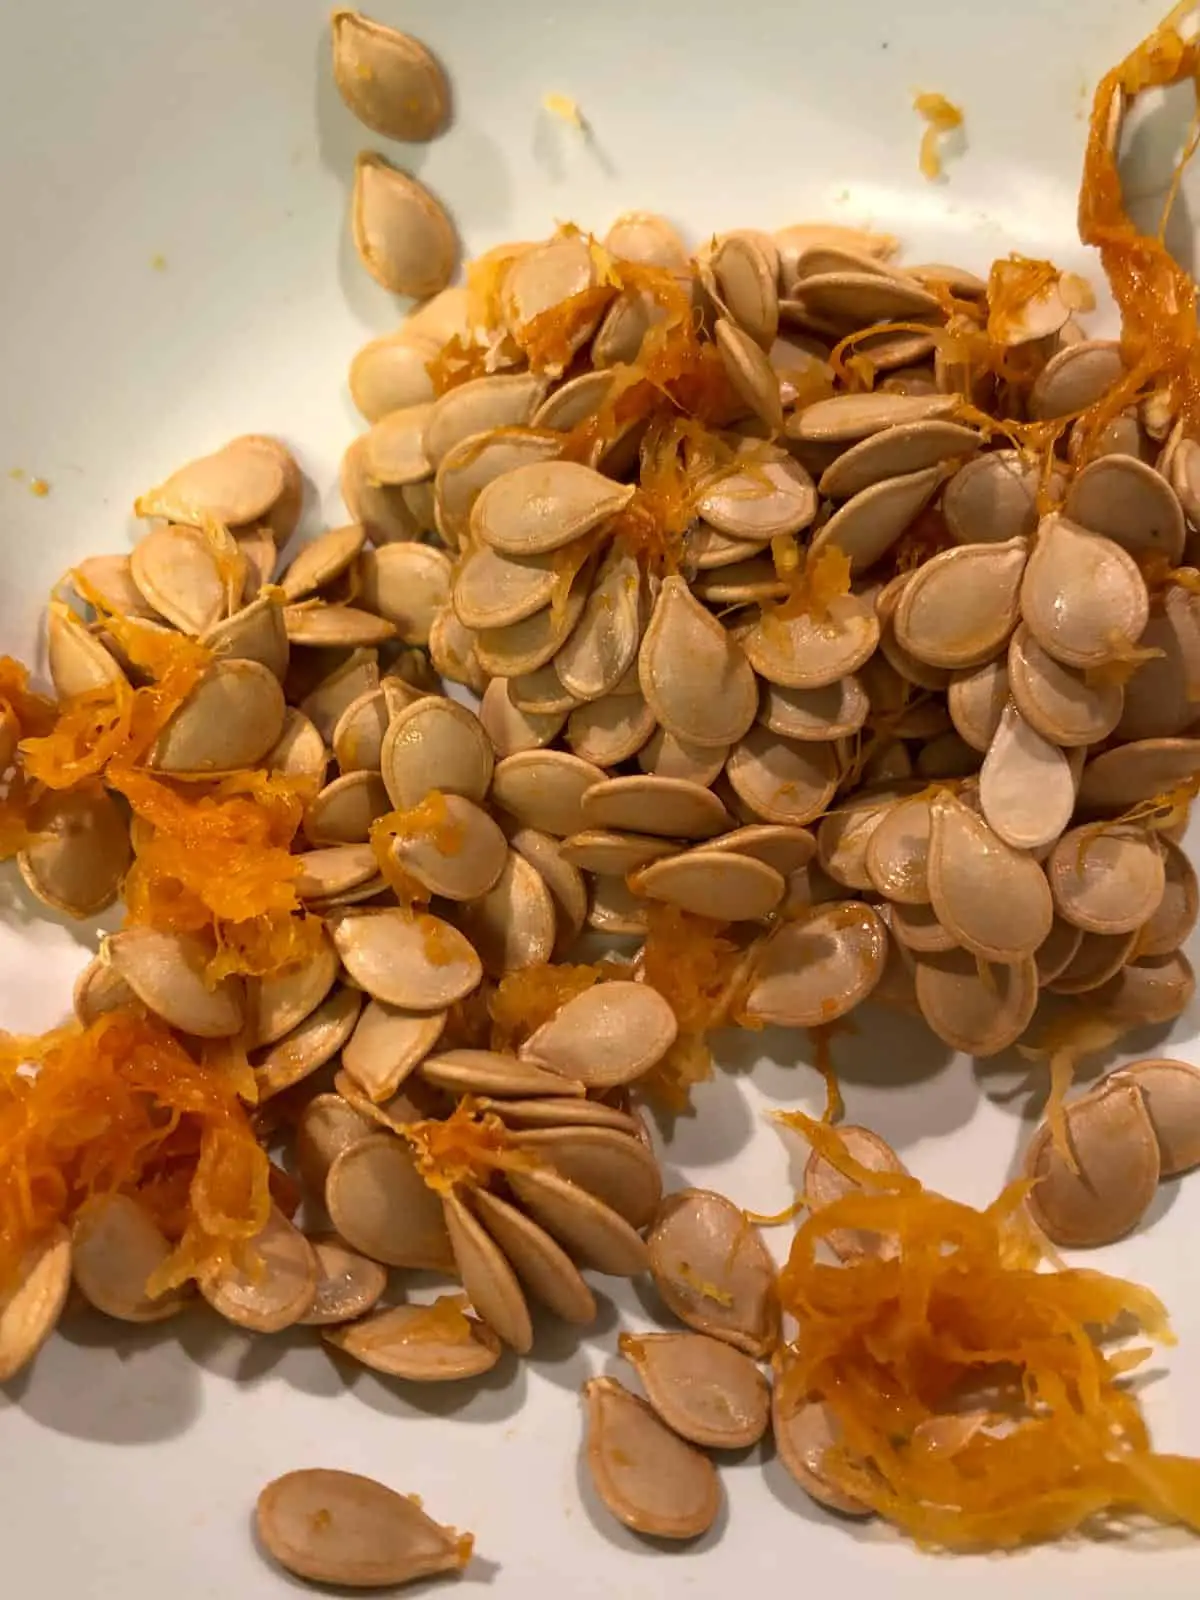 Squash seeds and orange pith in a white bowl.